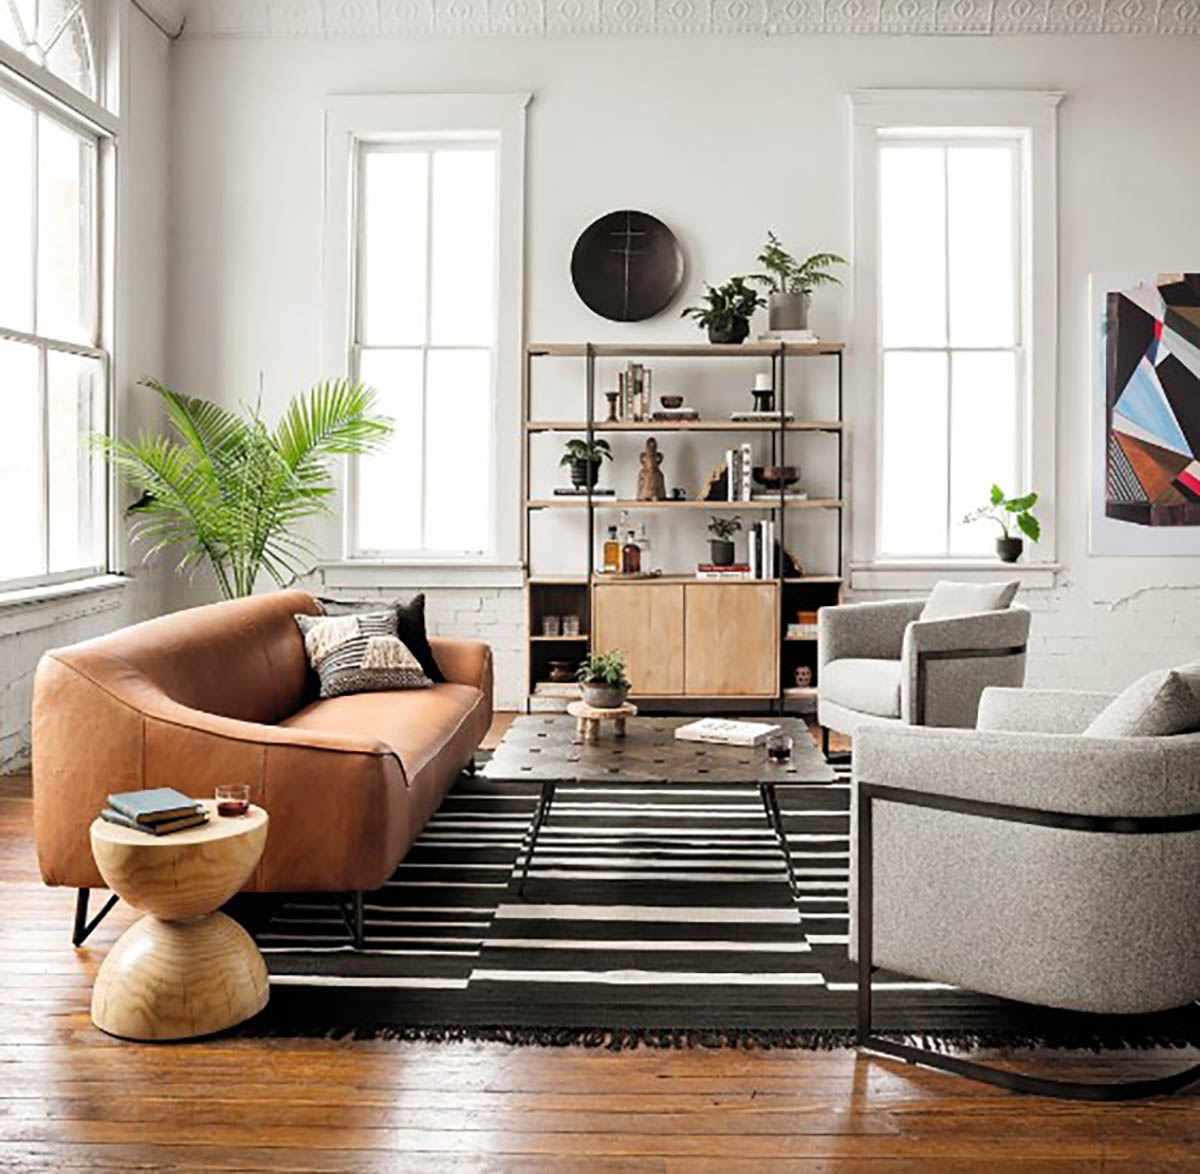 Creating a focal point in your living room